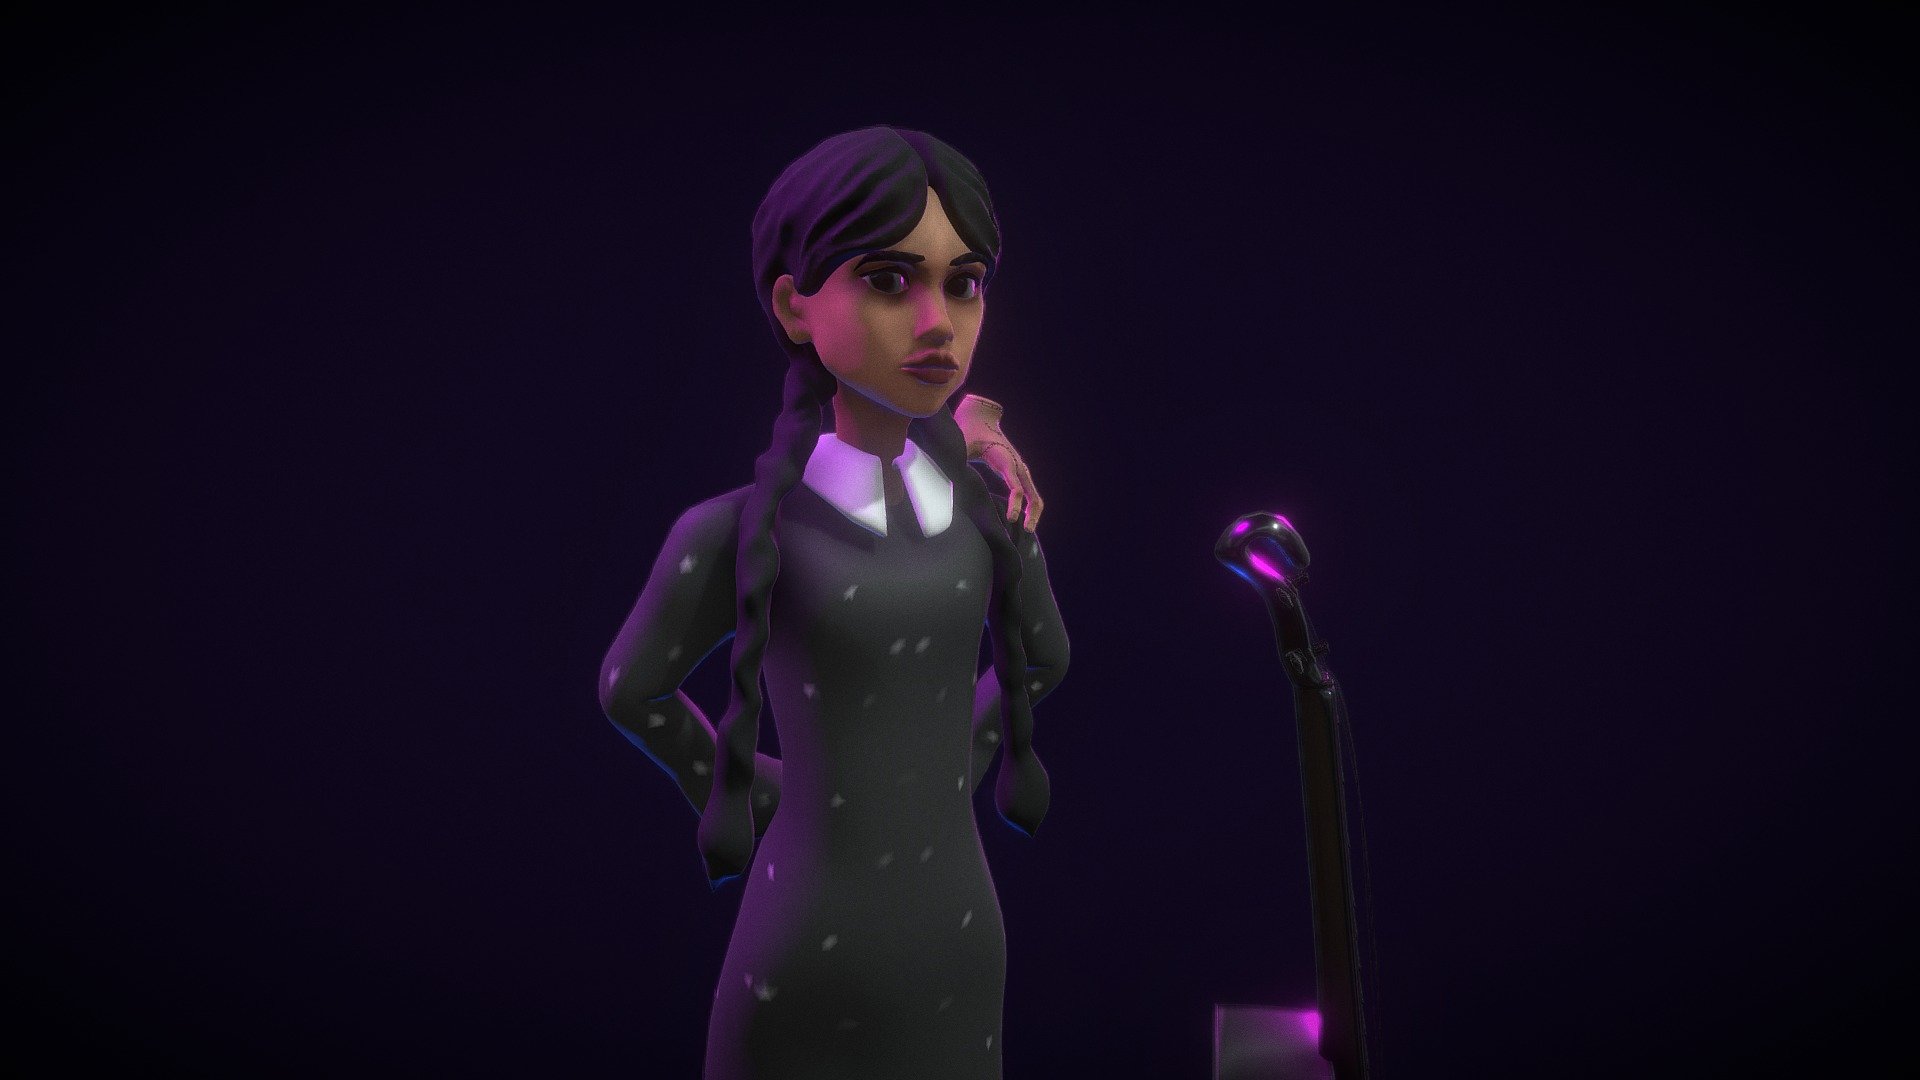 its an old project i did for fun 
quick sculpt of wednesday addams made with blender 
thought why not upload it - wednesday addams - Download Free 3D model by Rached.Abdelkhalek 3d model